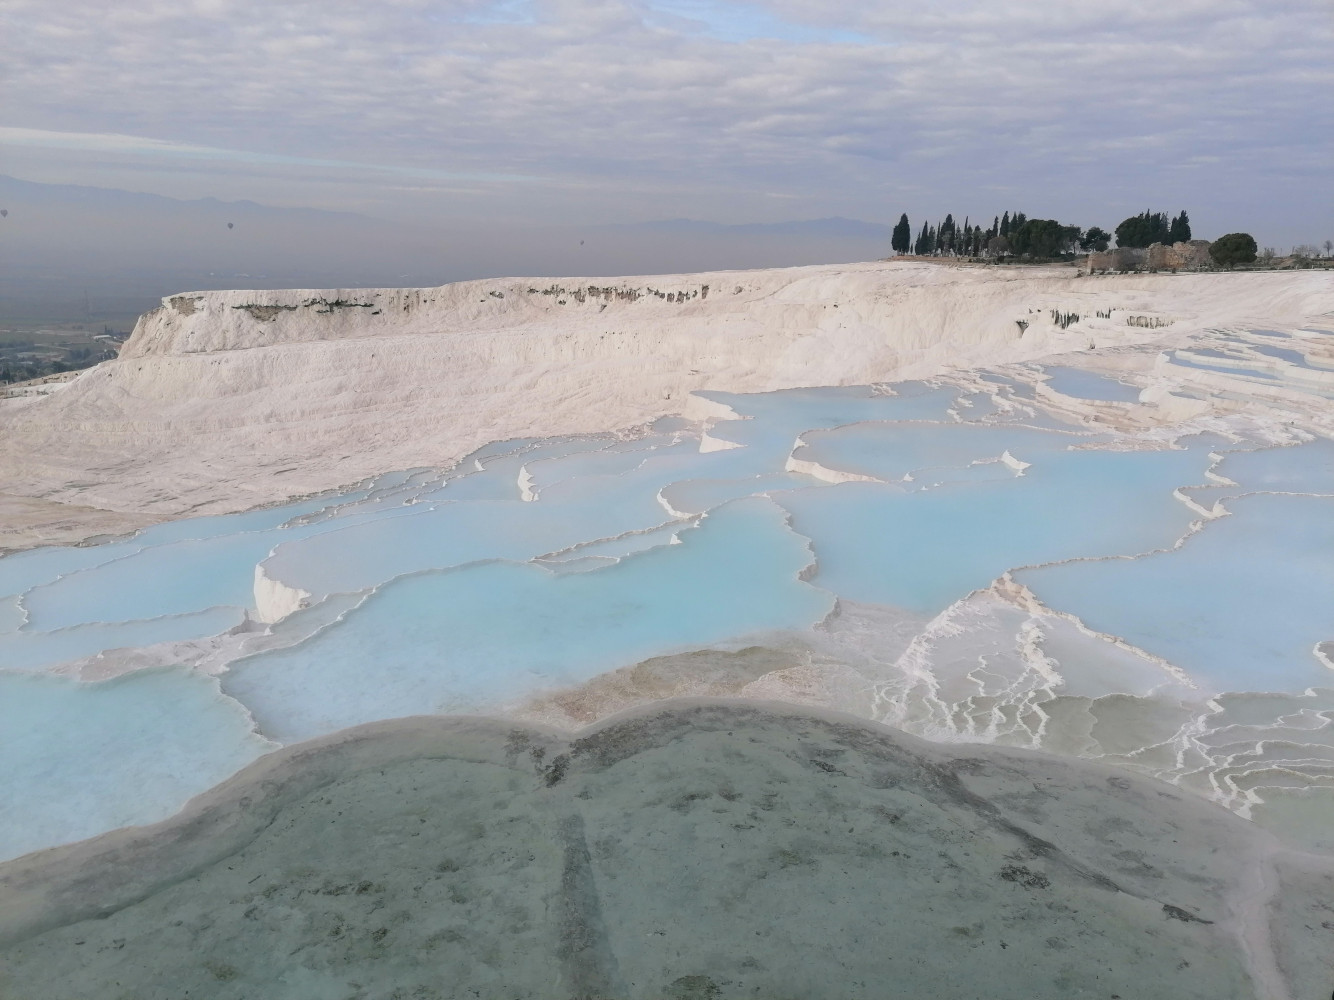 Biblical Tour To Colossae, Laodicea And Pamukkale